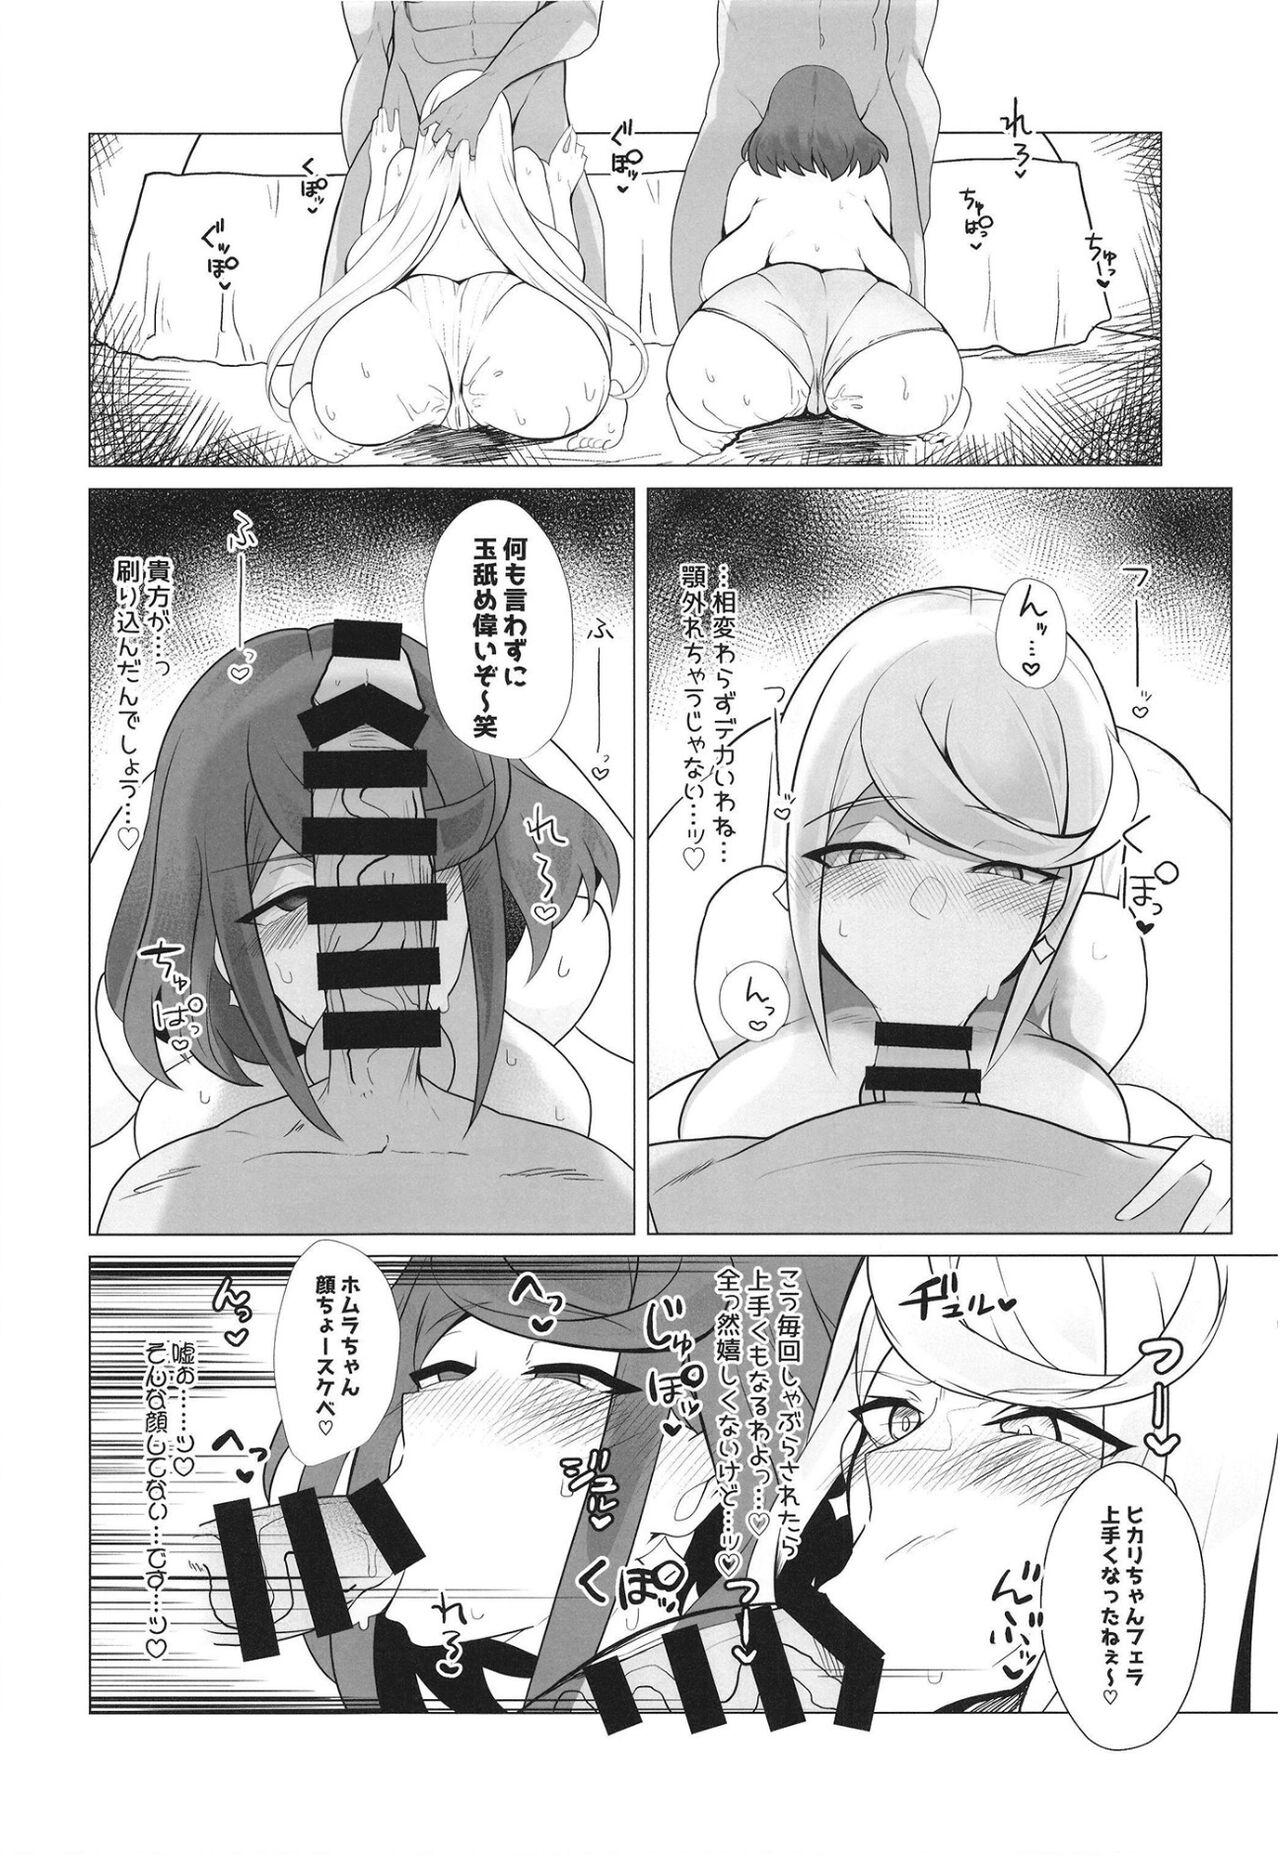 Moan 杯、満ちて。 - Xenoblade chronicles 2 Fat Ass - Page 5